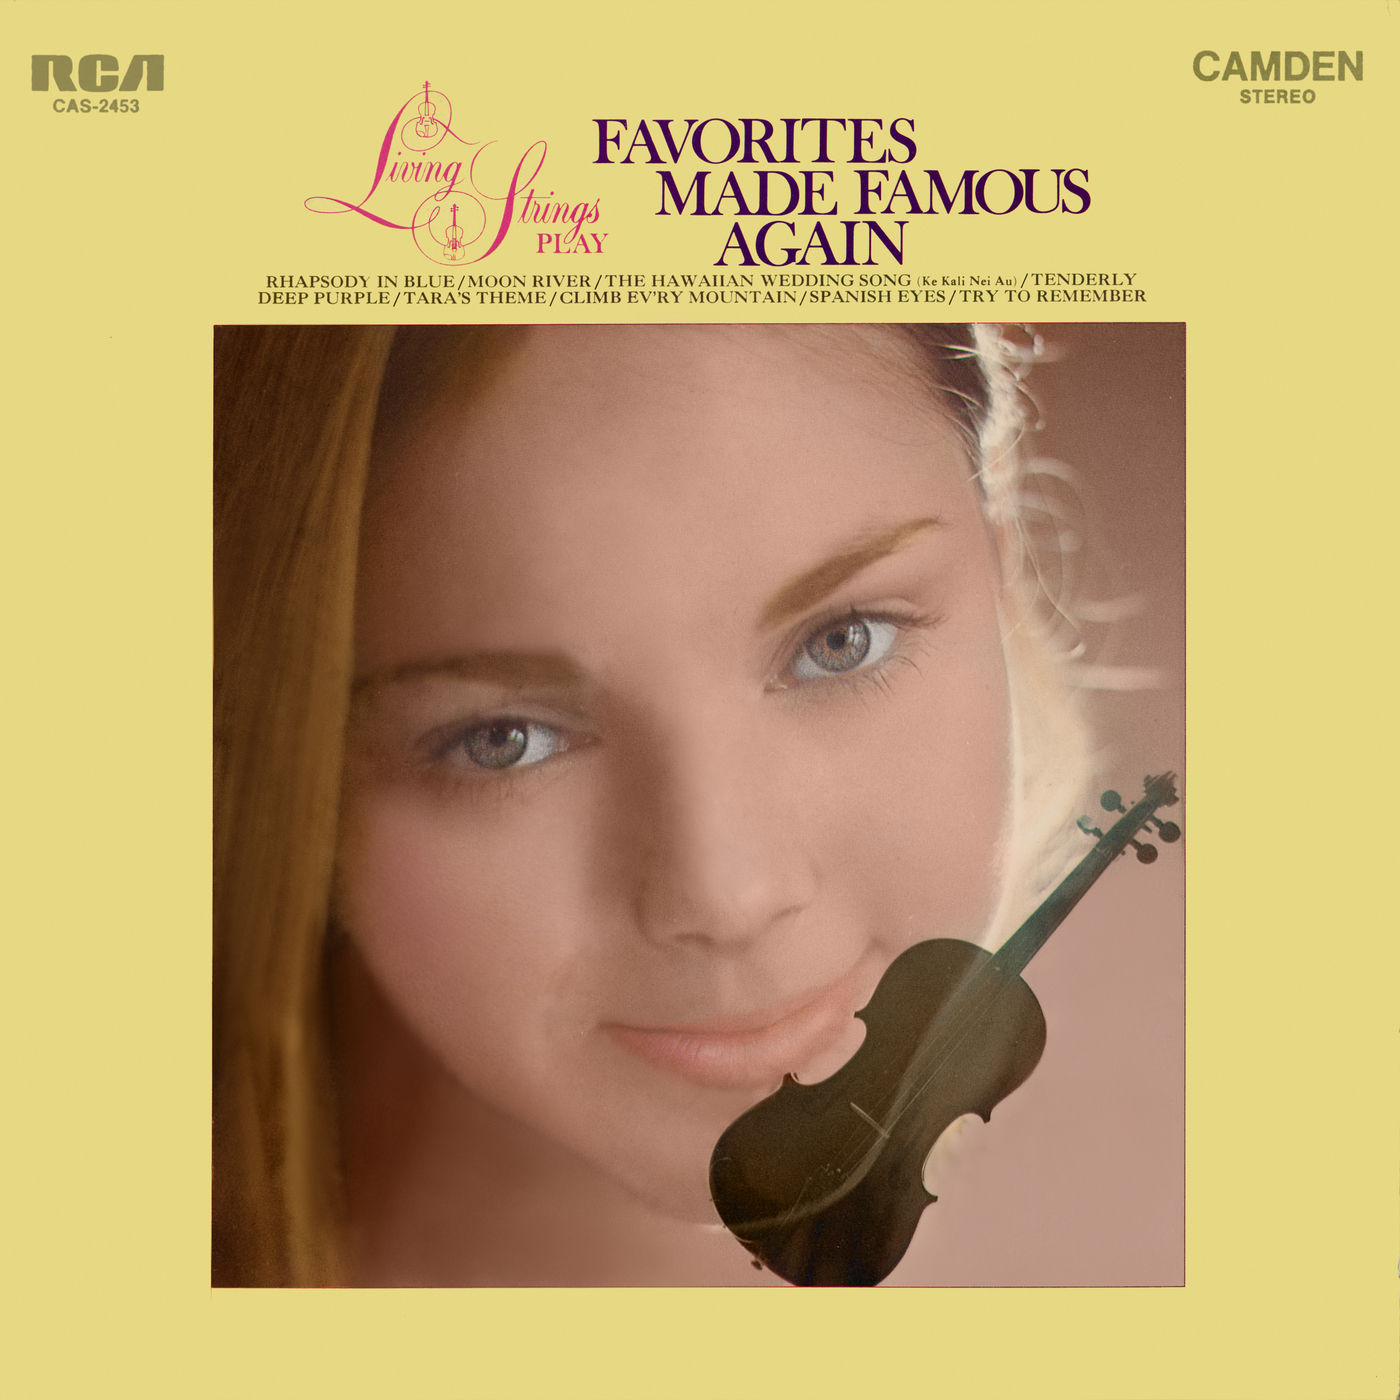 Living Strings - Play Favorites Made Famous Again (1971/2021) [FLAC 24bit/192kHz]